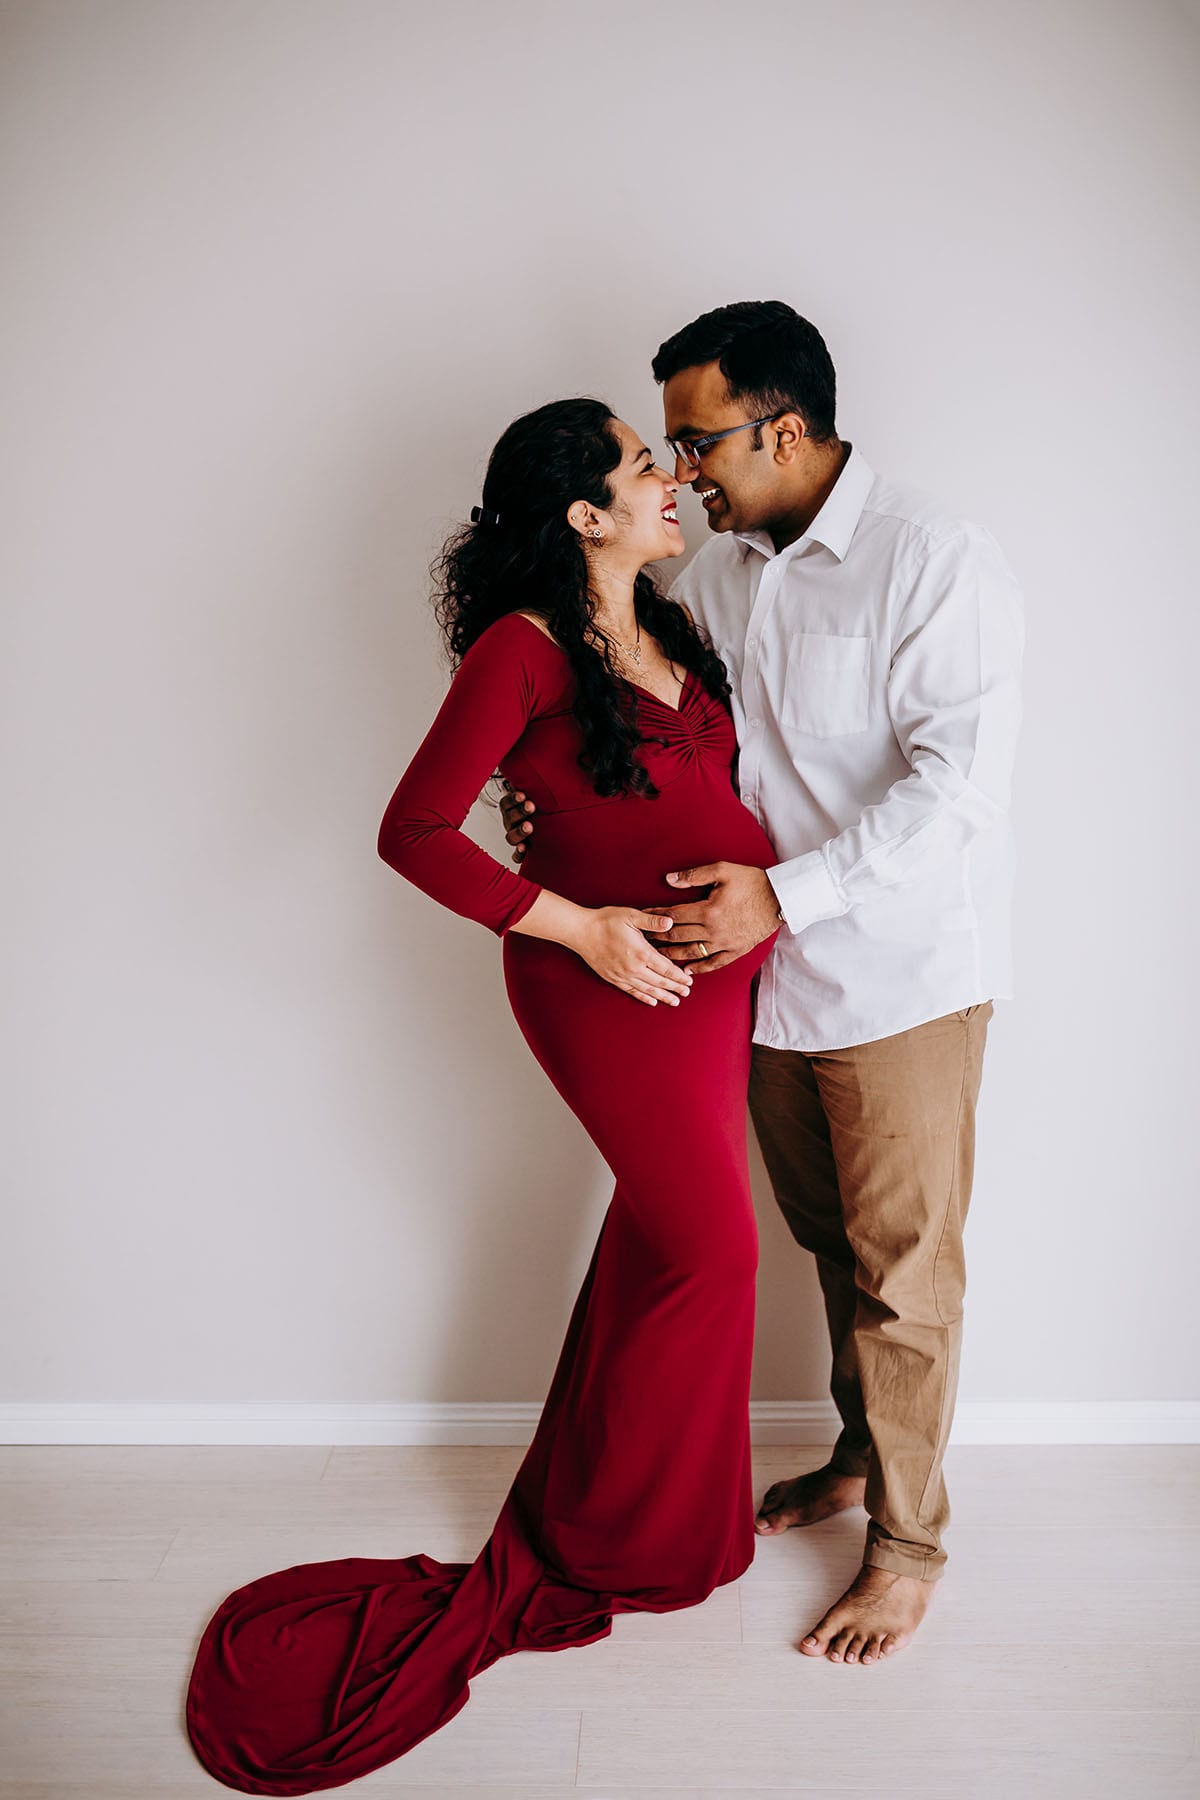 A man cradles his pregnant partners belly as they look lovingly at each other